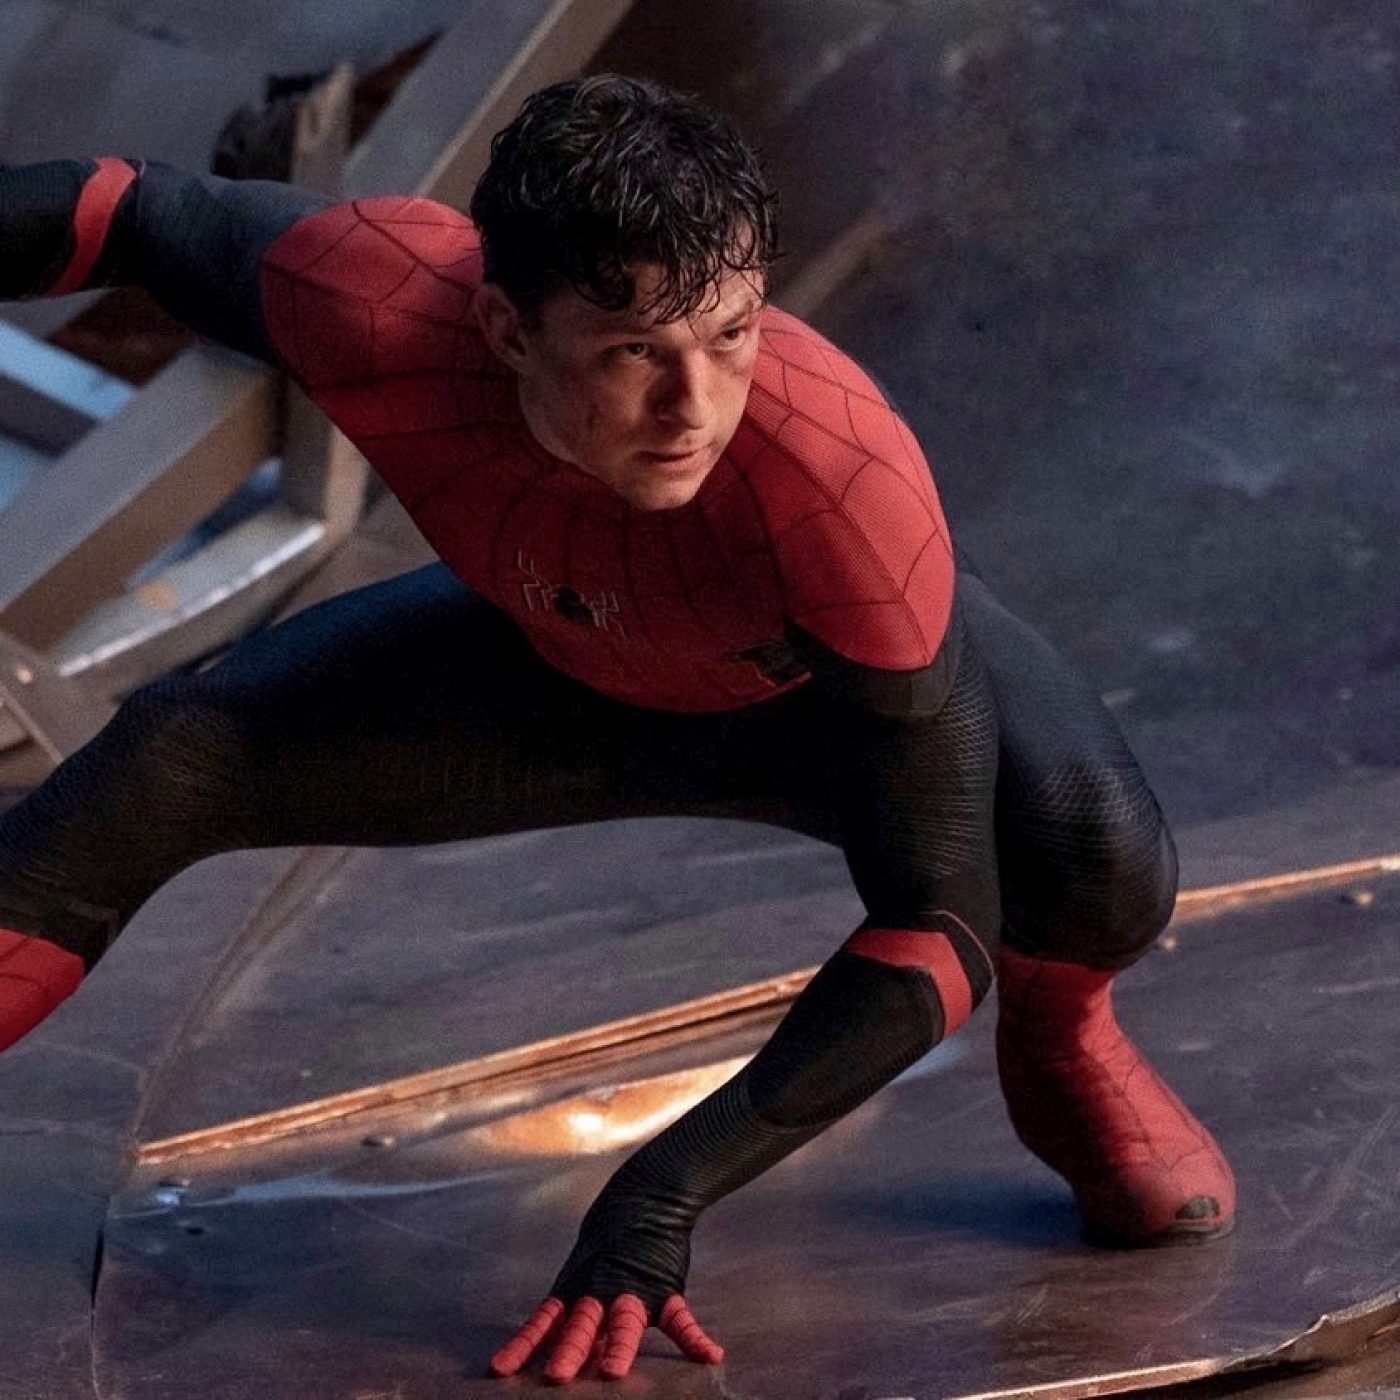 Rumor claims Spider-Man 4 will feature a young Miles Morales